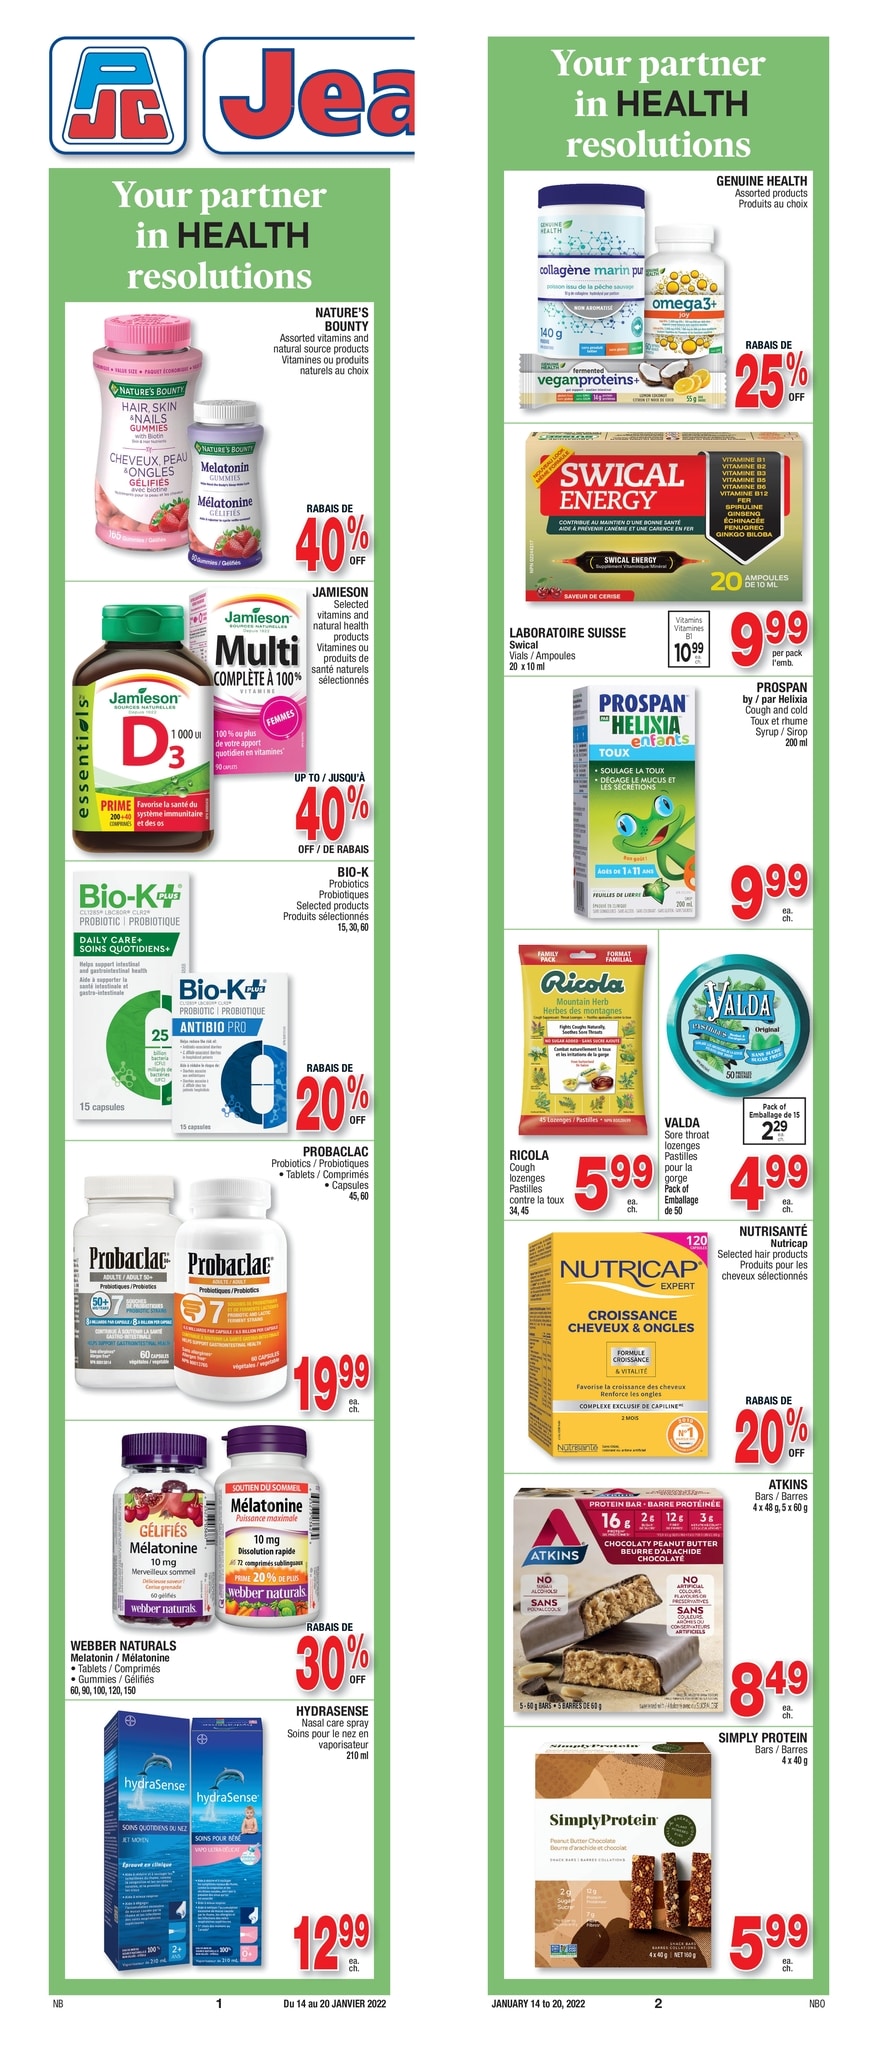 Jean Coutu - Weekly Flyer Specials - Page 3